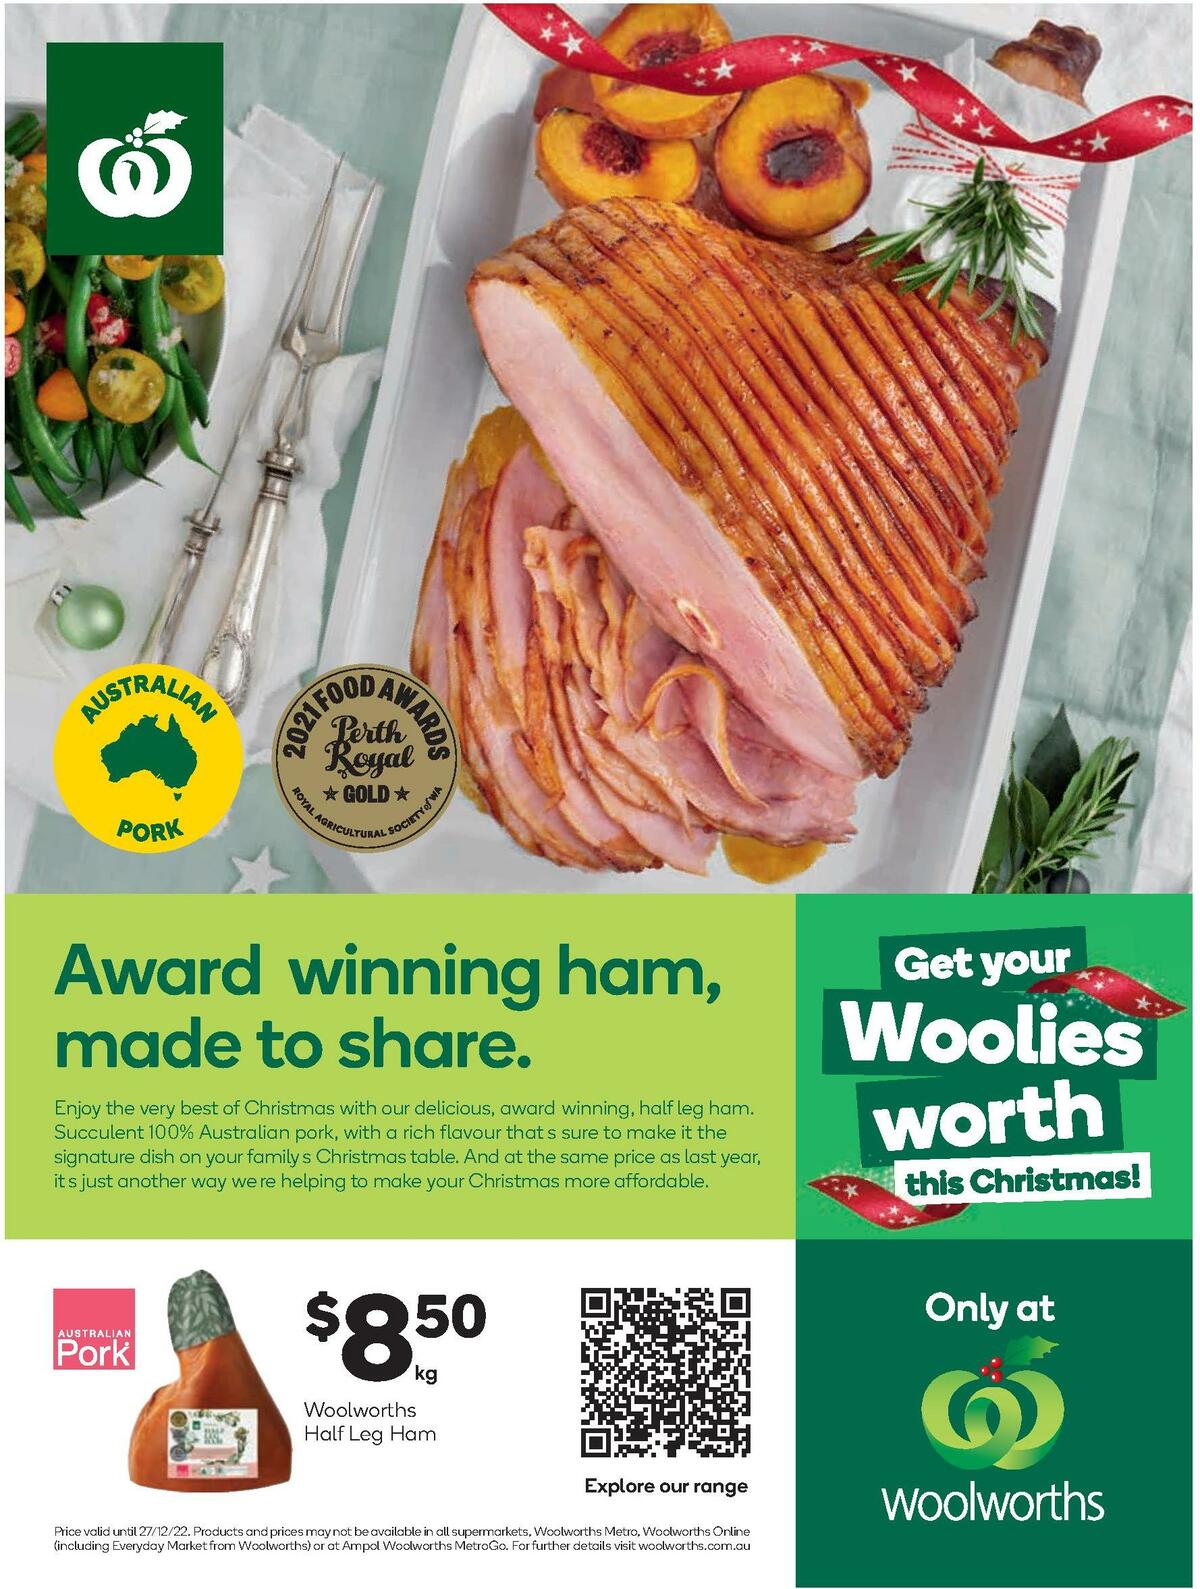 Woolworths Fresh Ideas Magazine December Catalogues from 1 December